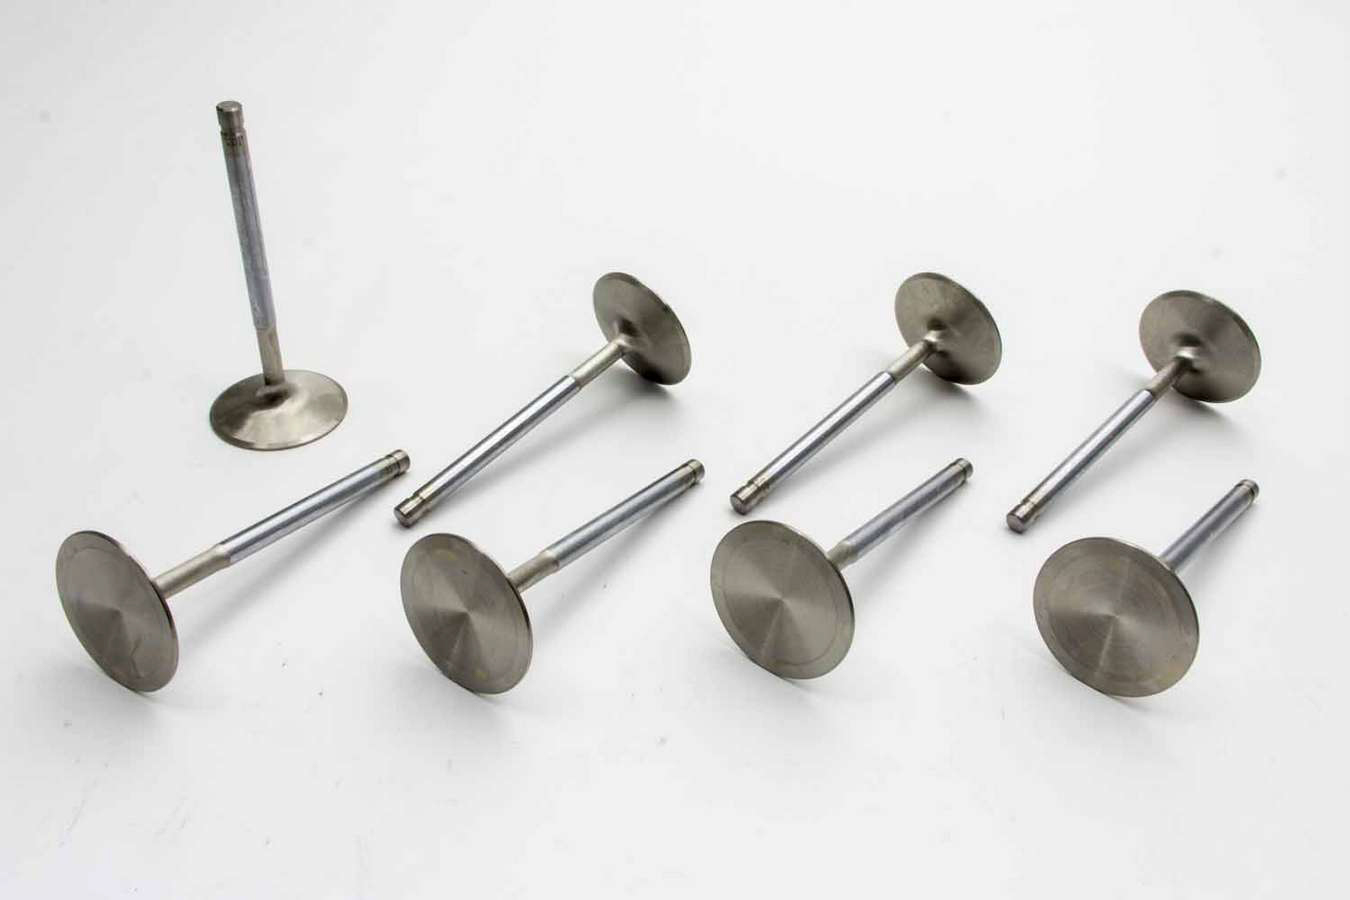 Exhaust Valve, Race Master, 1.550 in Head, 0.314 in Valve Stem, 4.923 in Long, Stainless, LS1 / LS2, GM LS-Series, Set of 8